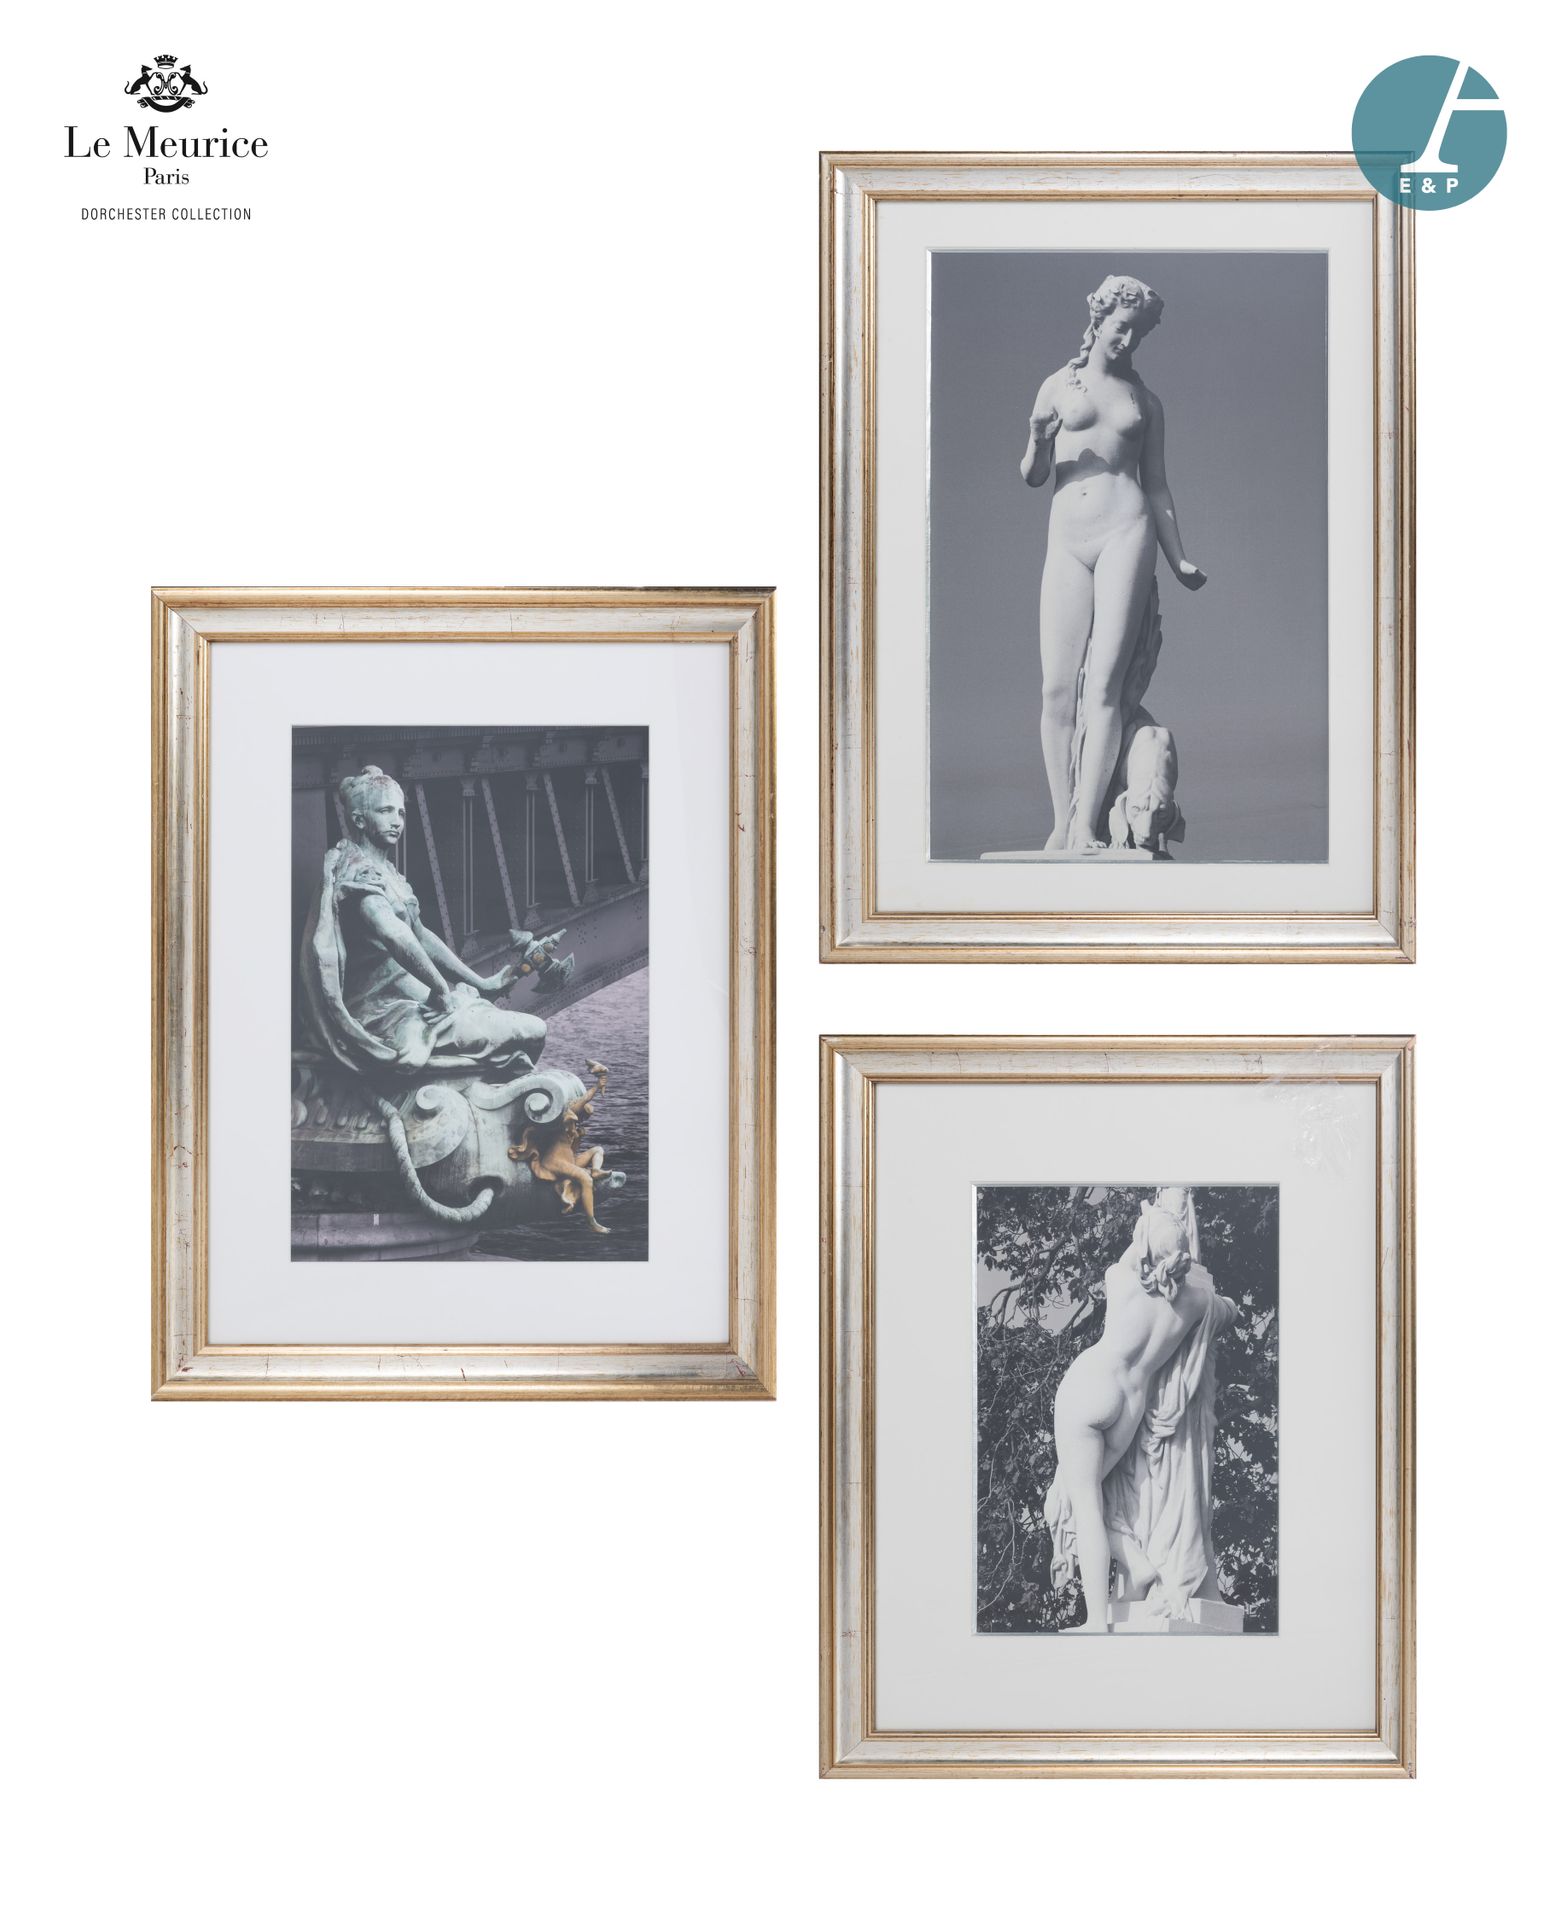 Null From Hôtel Le Meurice.
Set of three framed photographs, featuring details o&hellip;